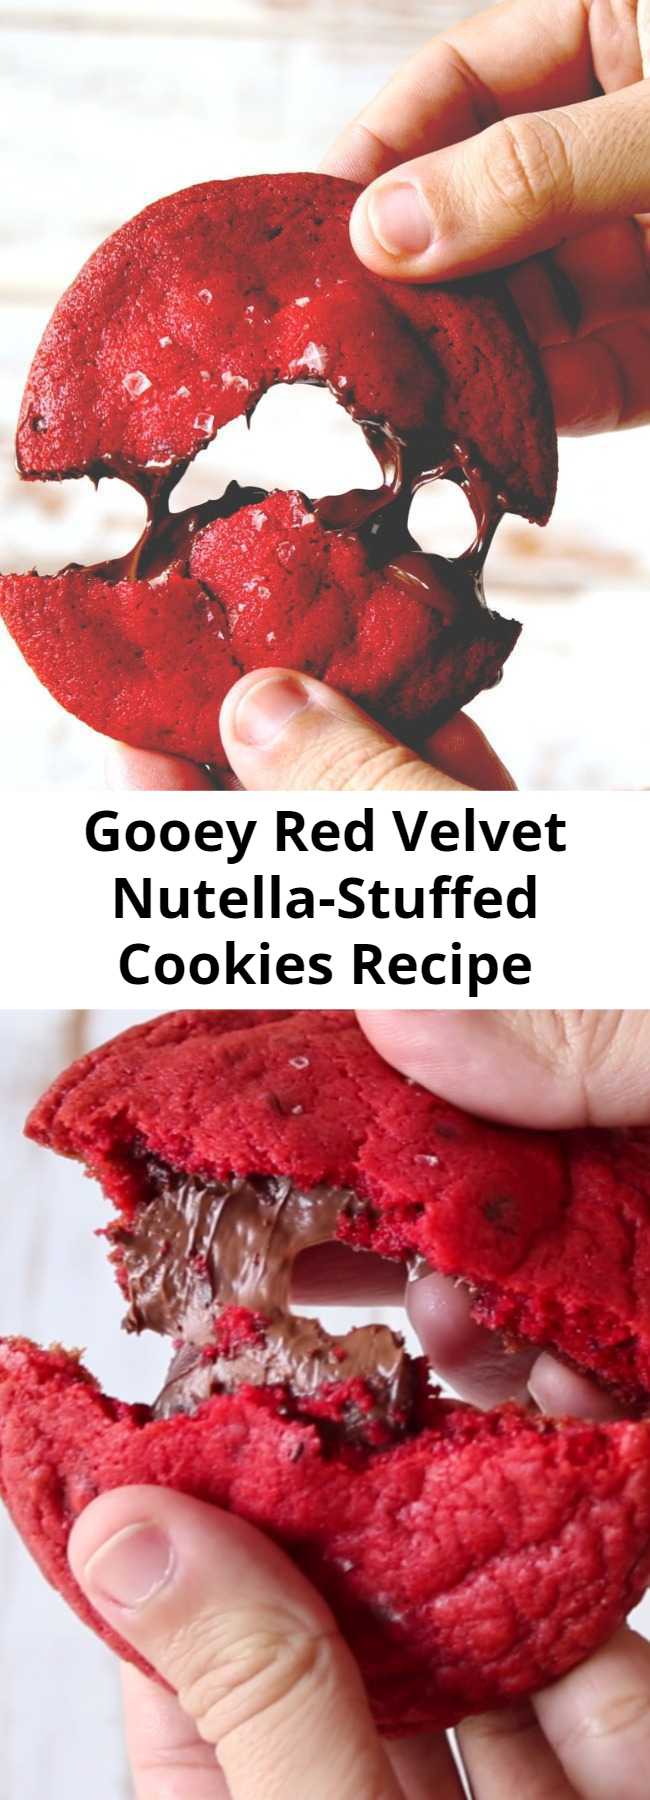 Gooey Red Velvet Nutella-Stuffed Cookies Recipe - Red velvet cookies are even better when they're stuffed with warm melted Nutella. Oh baby! You won't be able to stop at one. So rich and gooey, they speak for themselves.